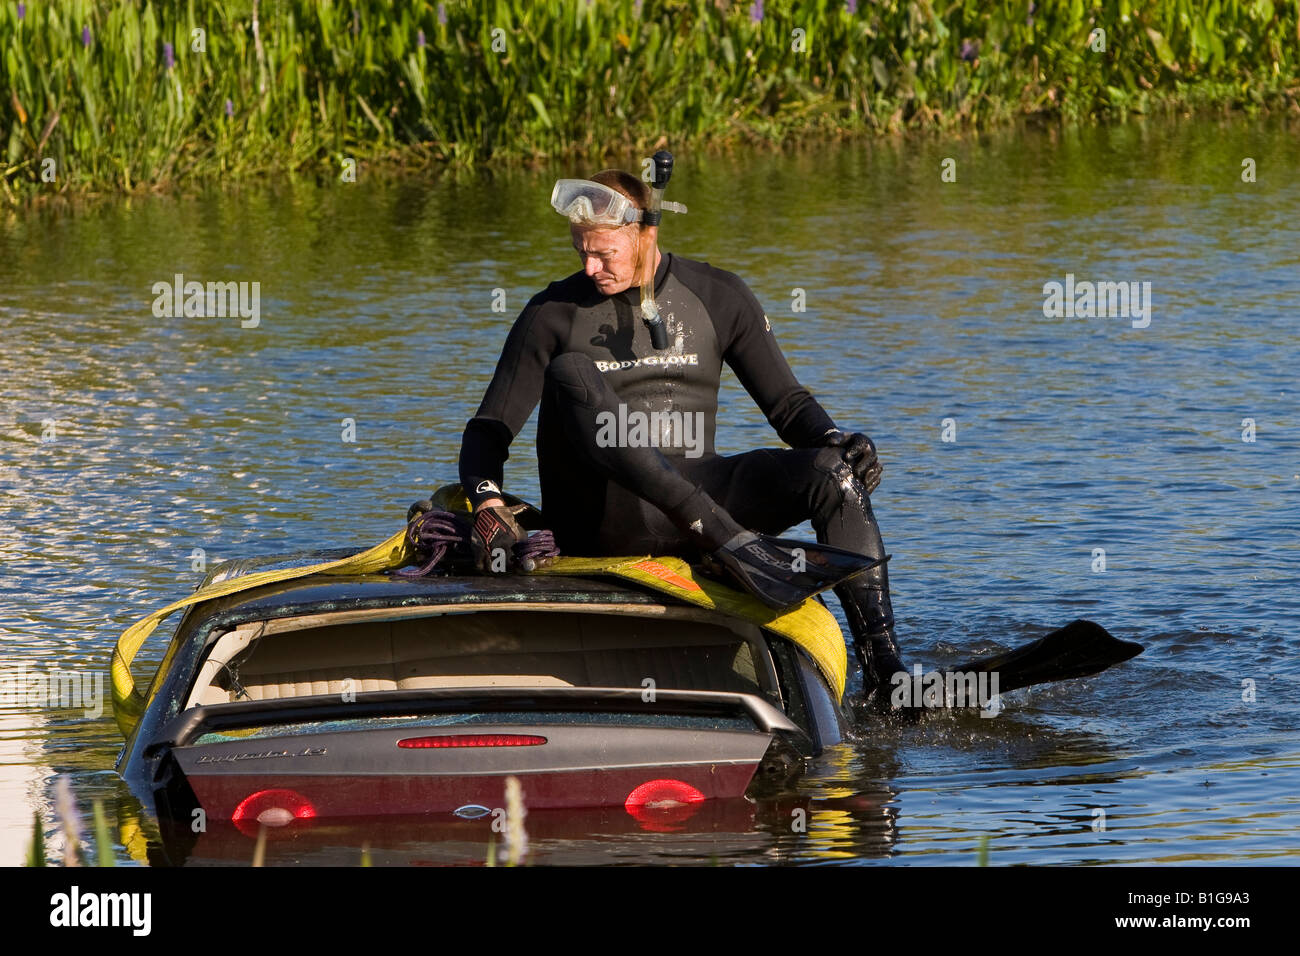 Salvage Diver Preparing a Car for Removal from a Lake Stock Photo